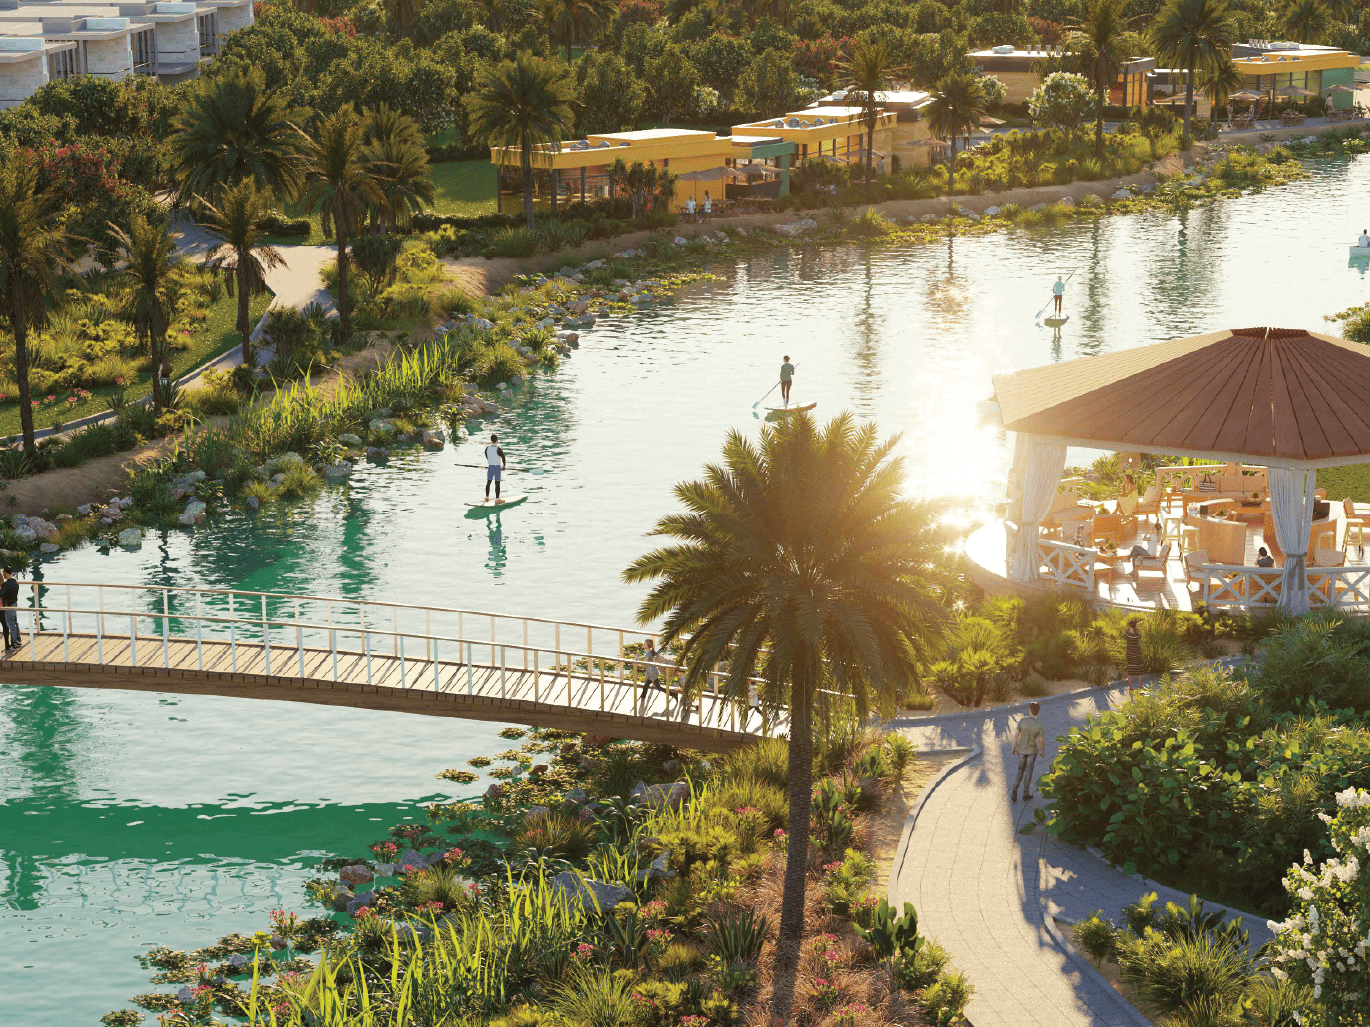 The image shows the Malibu Bay artificial beach, the lazy river, the wave surfing pool, and the floating pool.